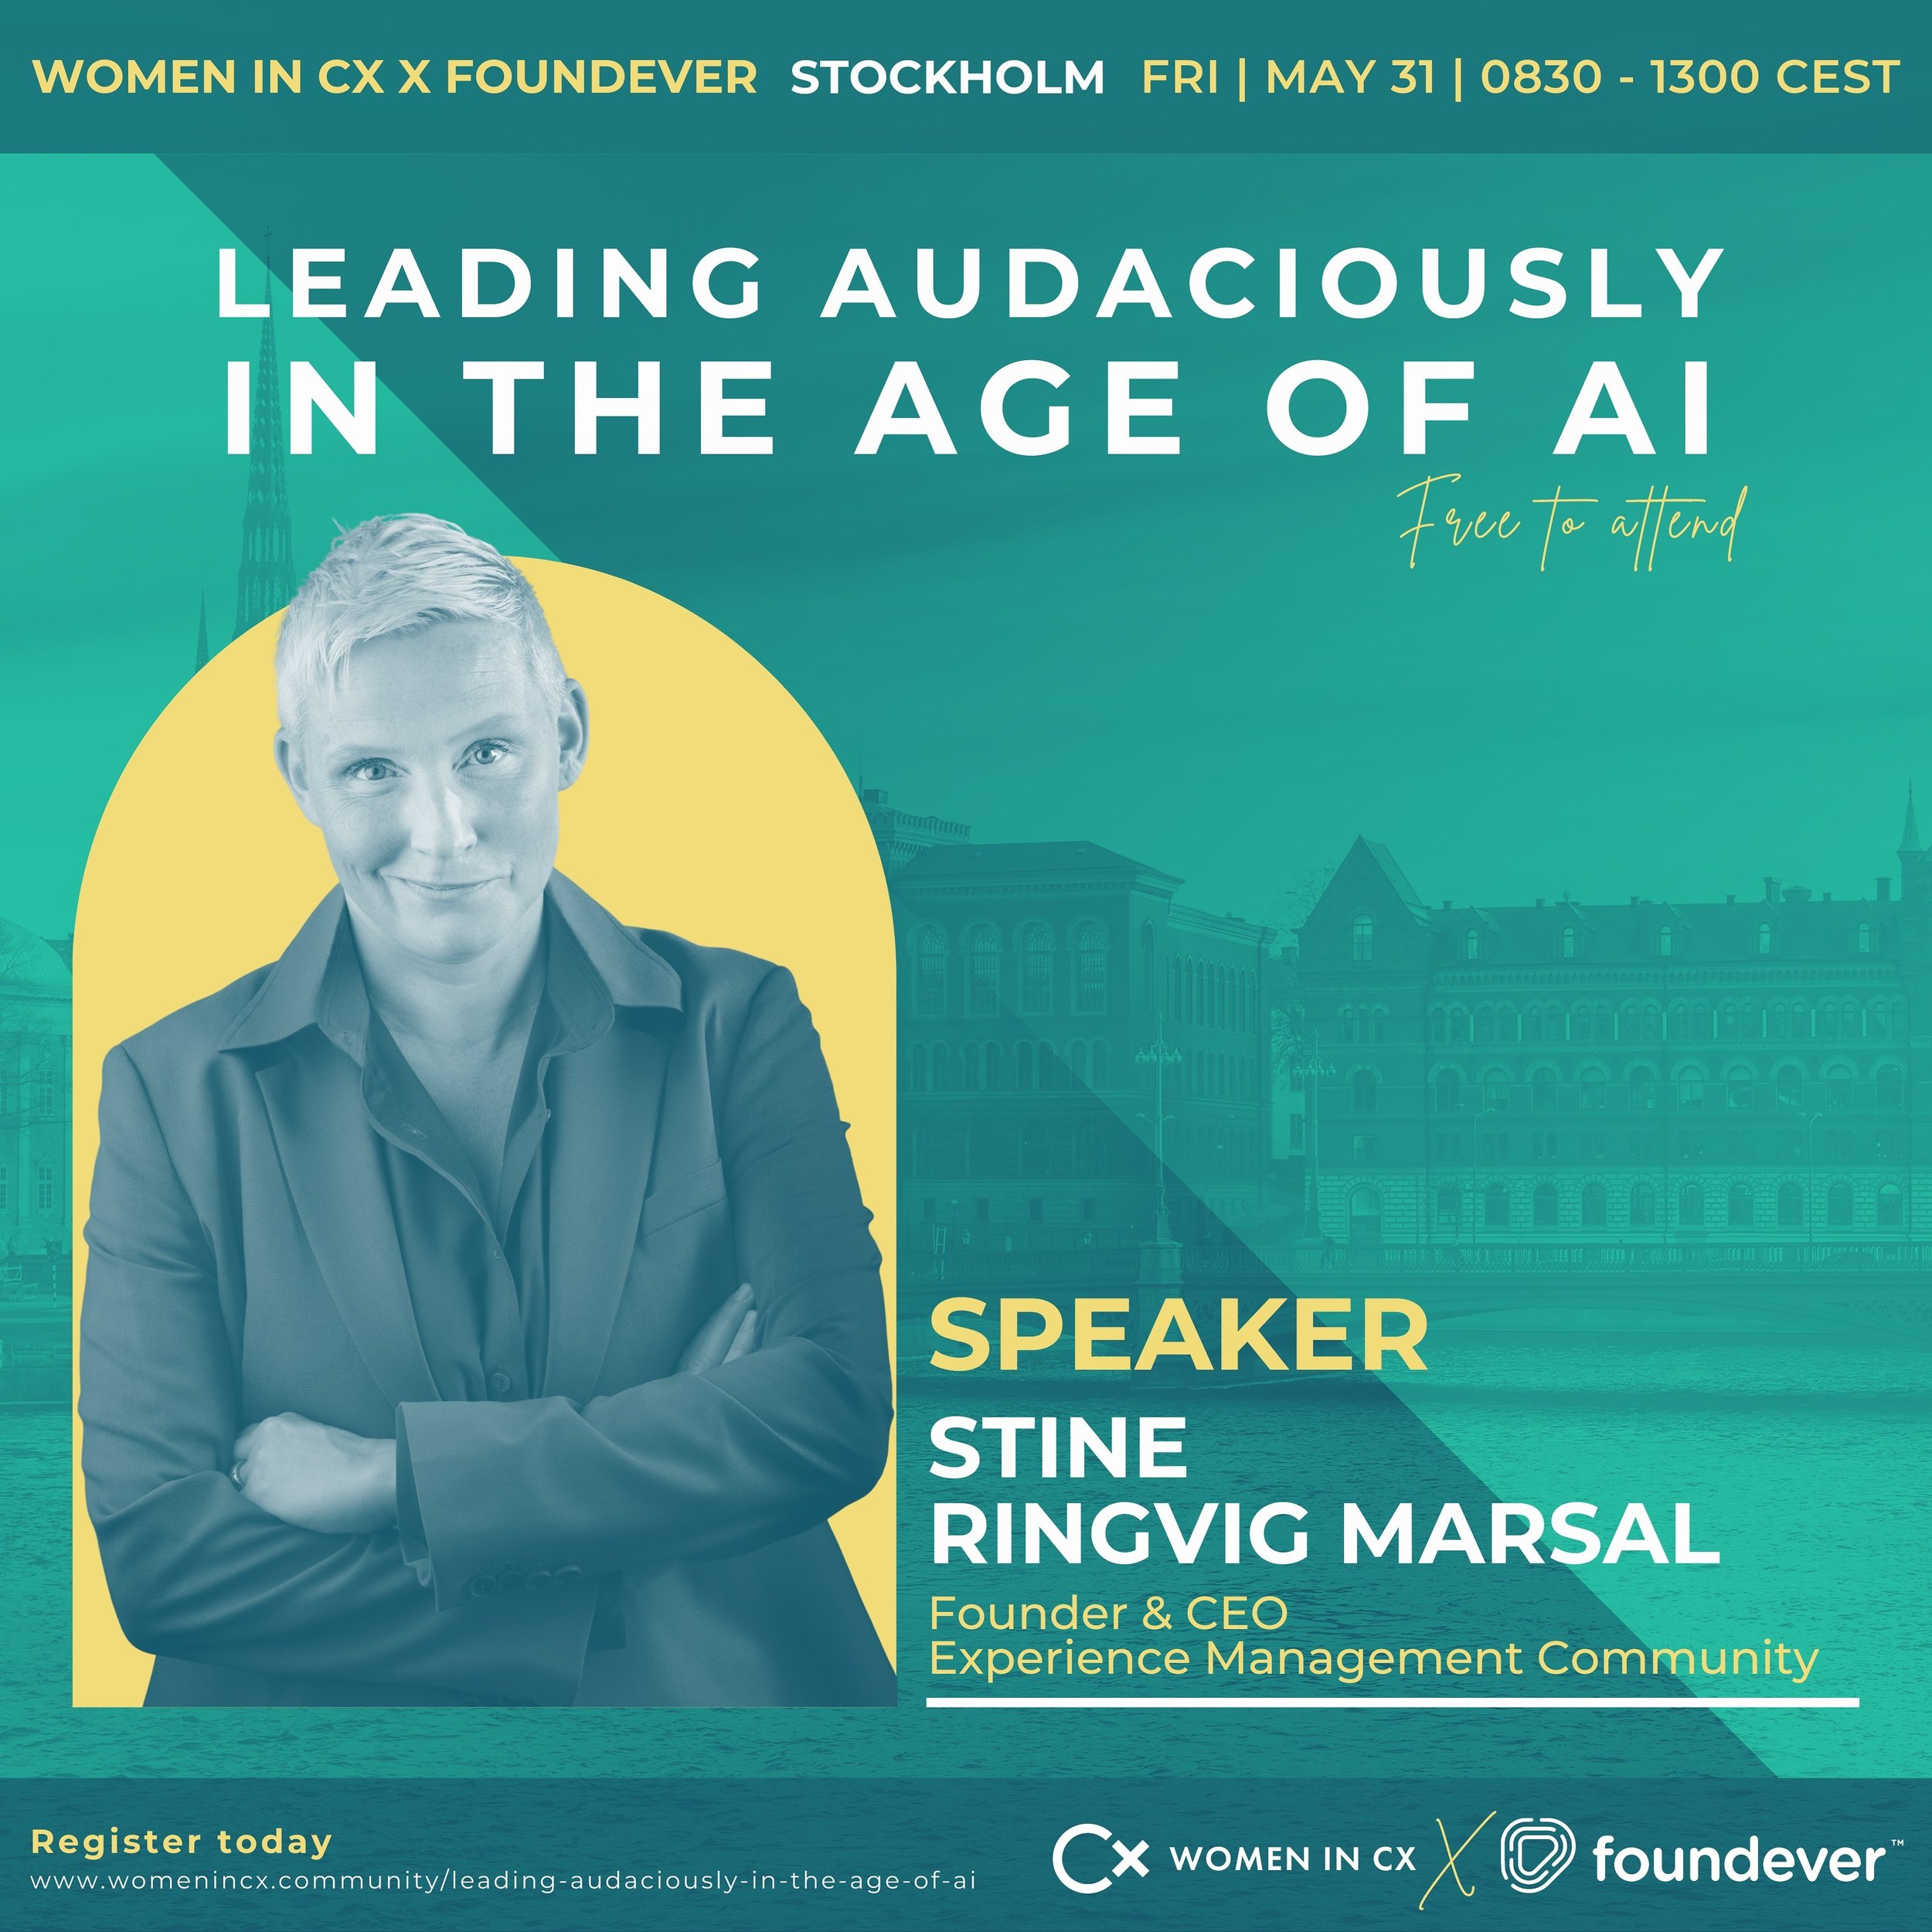 Now this speaker you may already recognise. 👀
&nbsp;
Having hosted many a masterclass for the Women in CX community, we&rsquo;re over the moon to announce that Stine Ringvig Marsal will be taking to the stage at our free upcoming event, &lsquo;Leadi